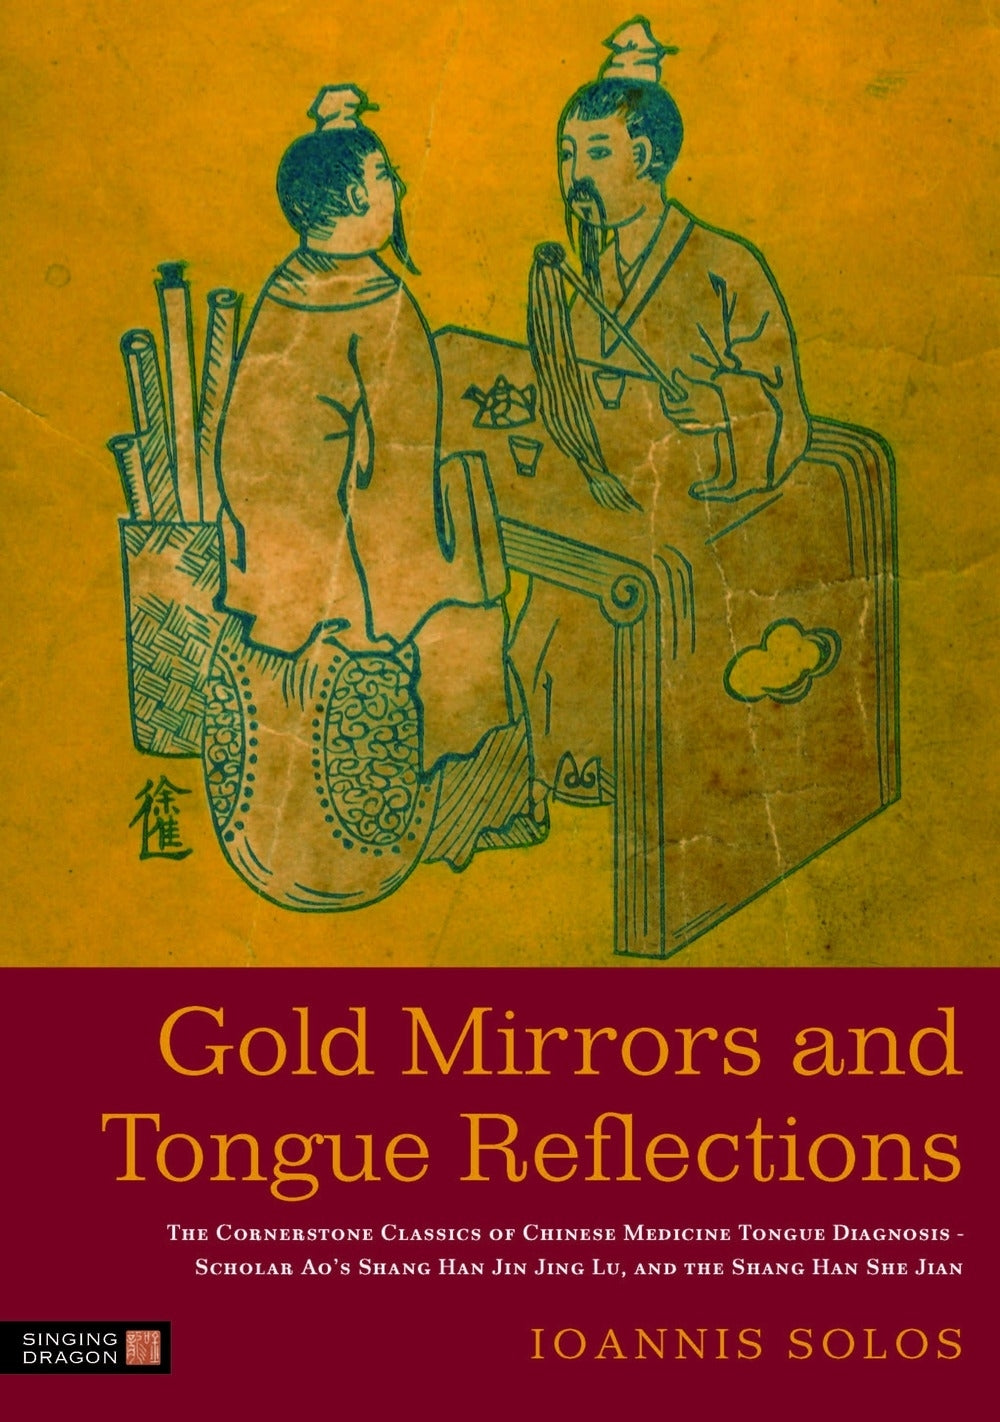 Gold Mirrors and Tongue Reflections by Ioannis Solos, Liang Rong, Chen Jia-Xu